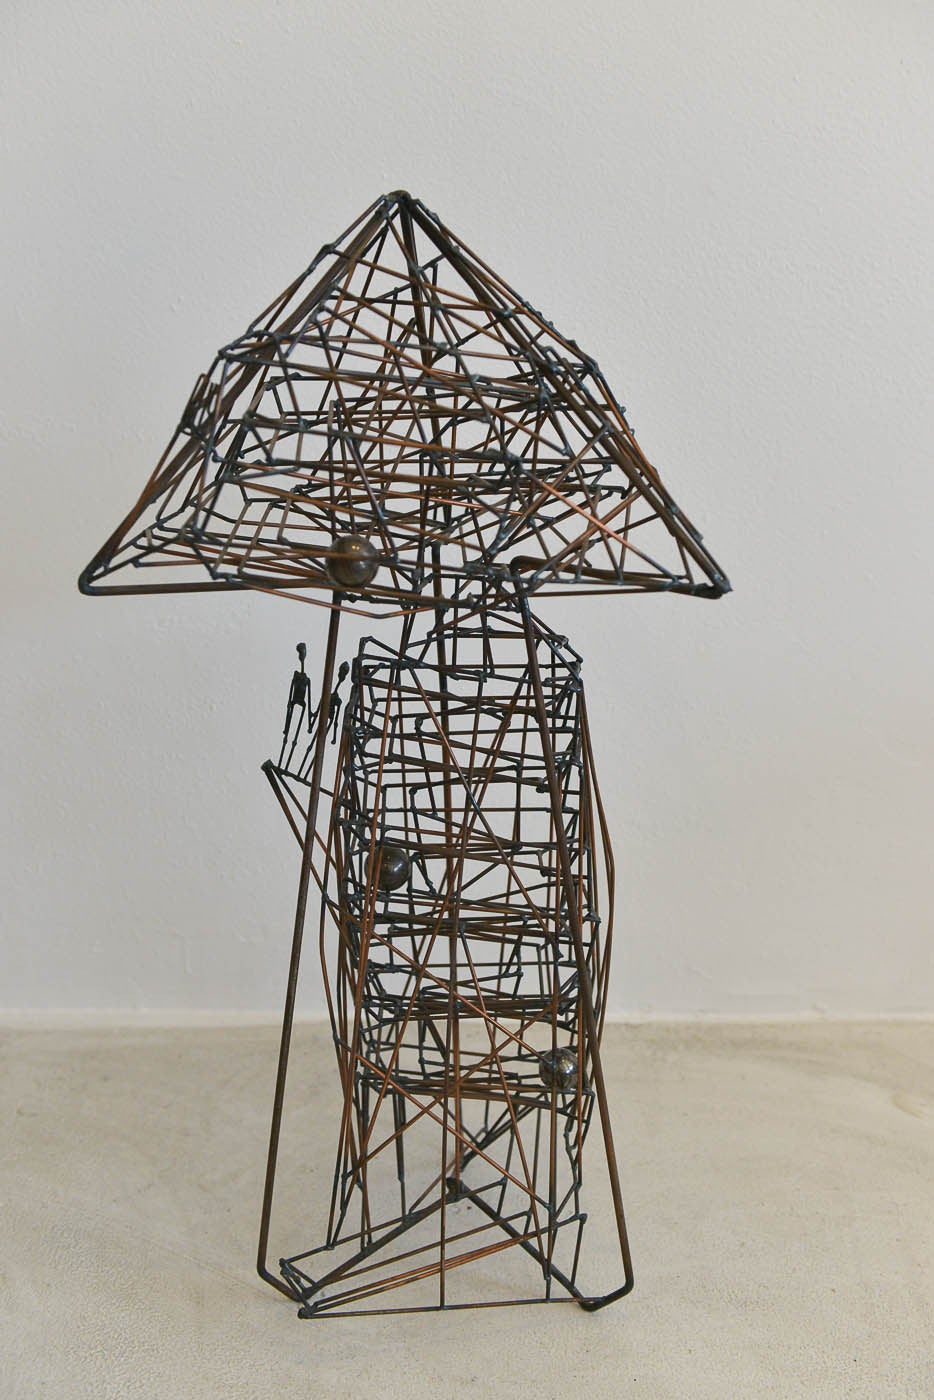 Rare kinetic wire sculpture by artist Guy Pullen. Three marble balls enter at the top of the sculpture and make their way down to the bottom of the tower. Original one of a kind piece, this is a great conversation piece for your home. Accented by